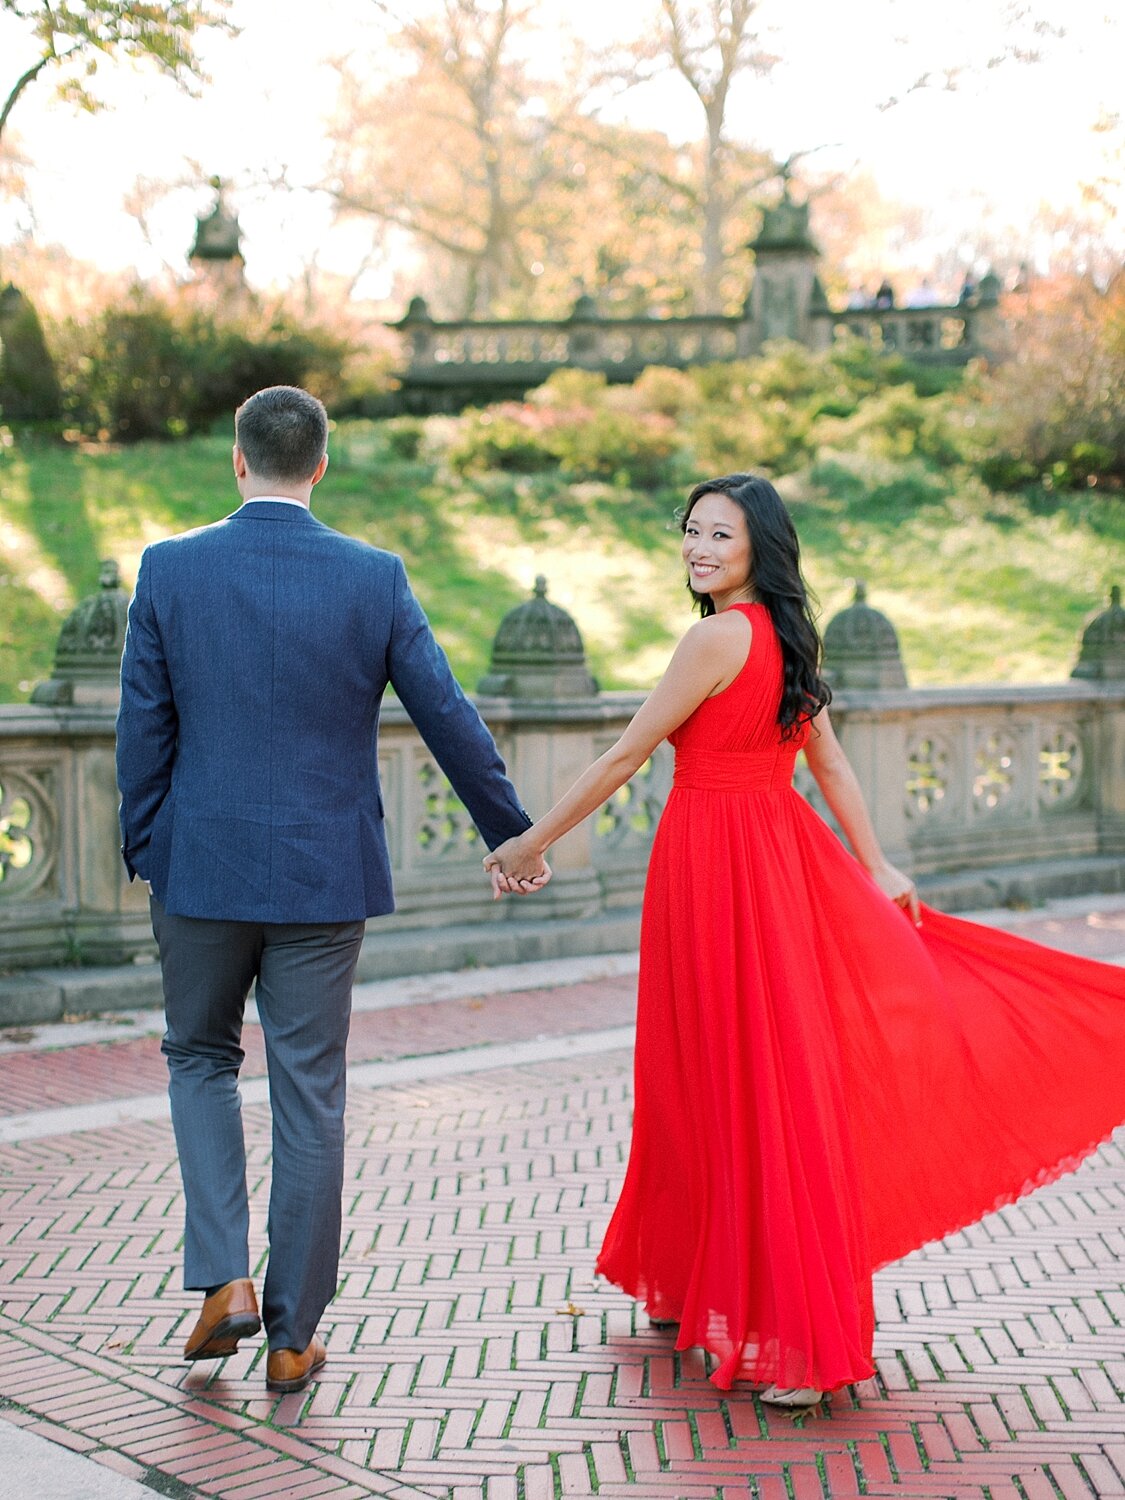 Asher Gardner Photography photographs fall engagement session in Central Park